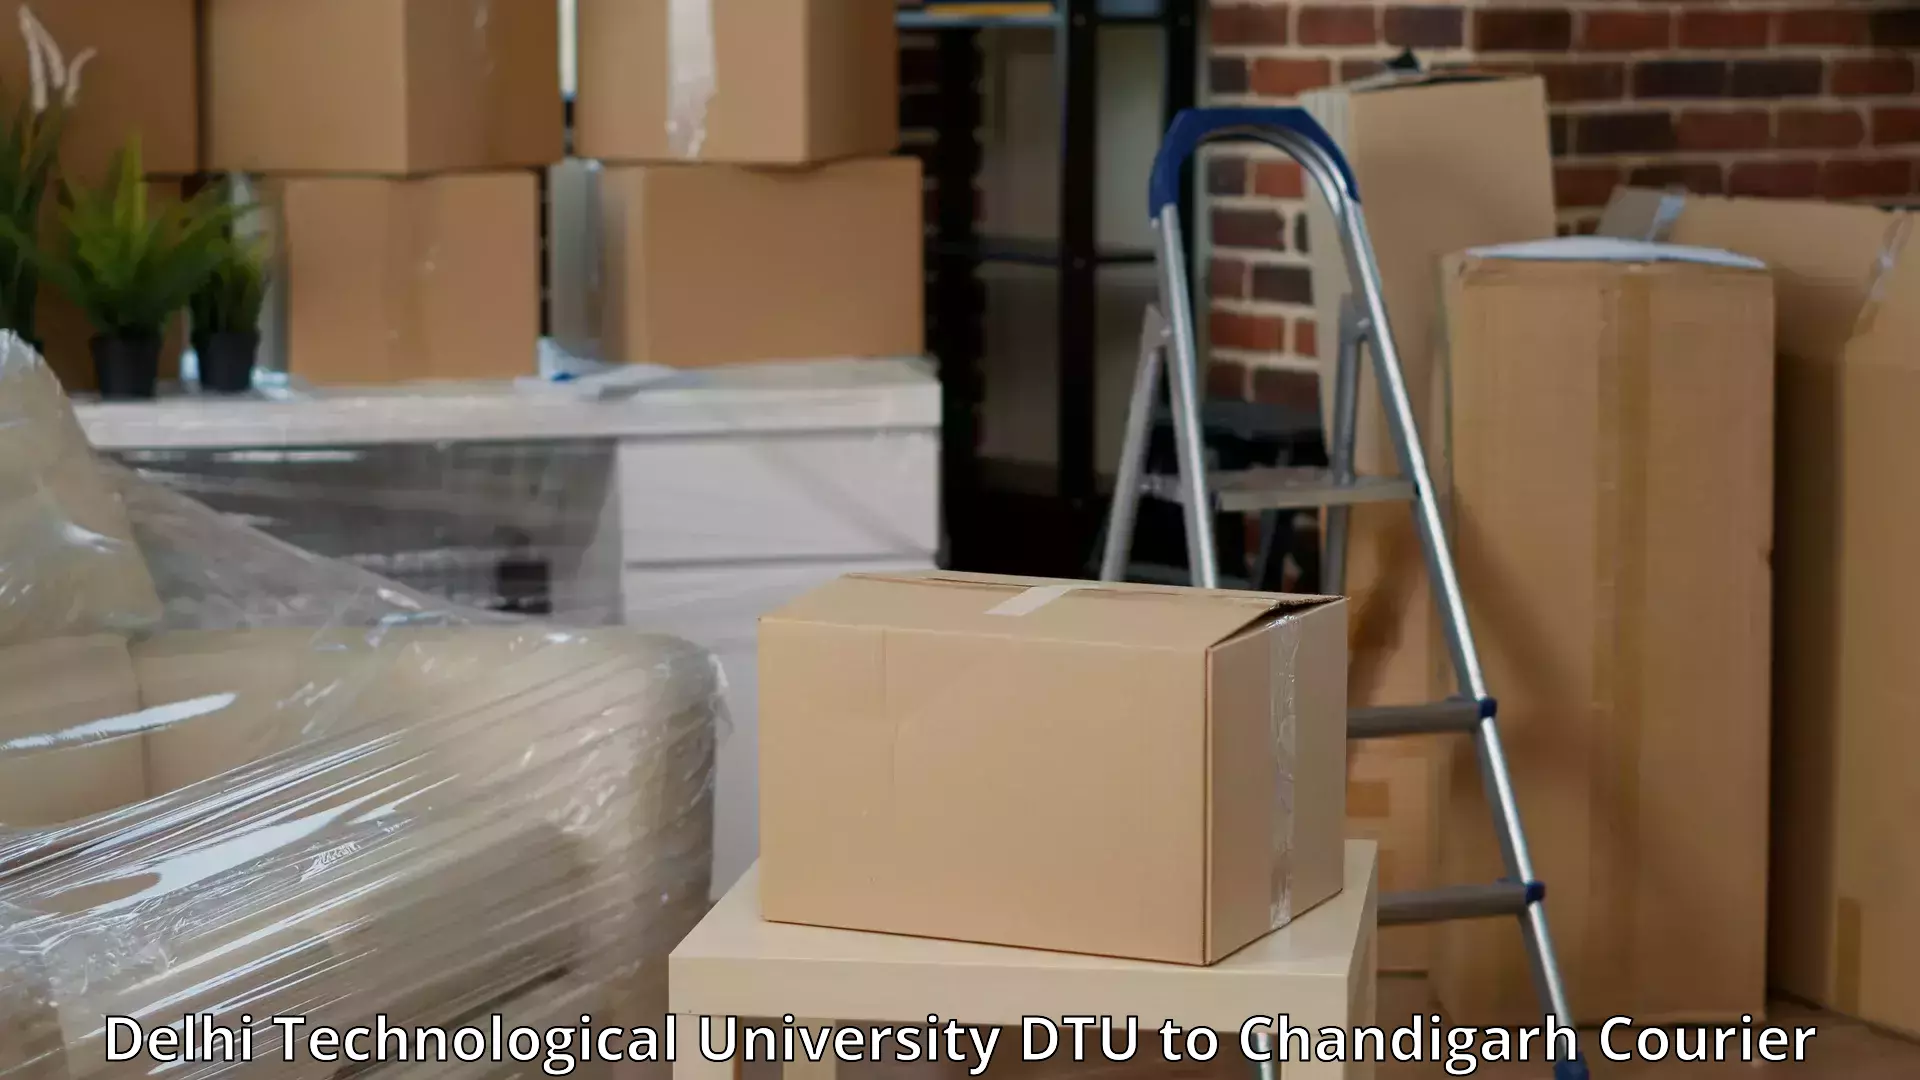 Household moving and storage Delhi Technological University DTU to Chandigarh